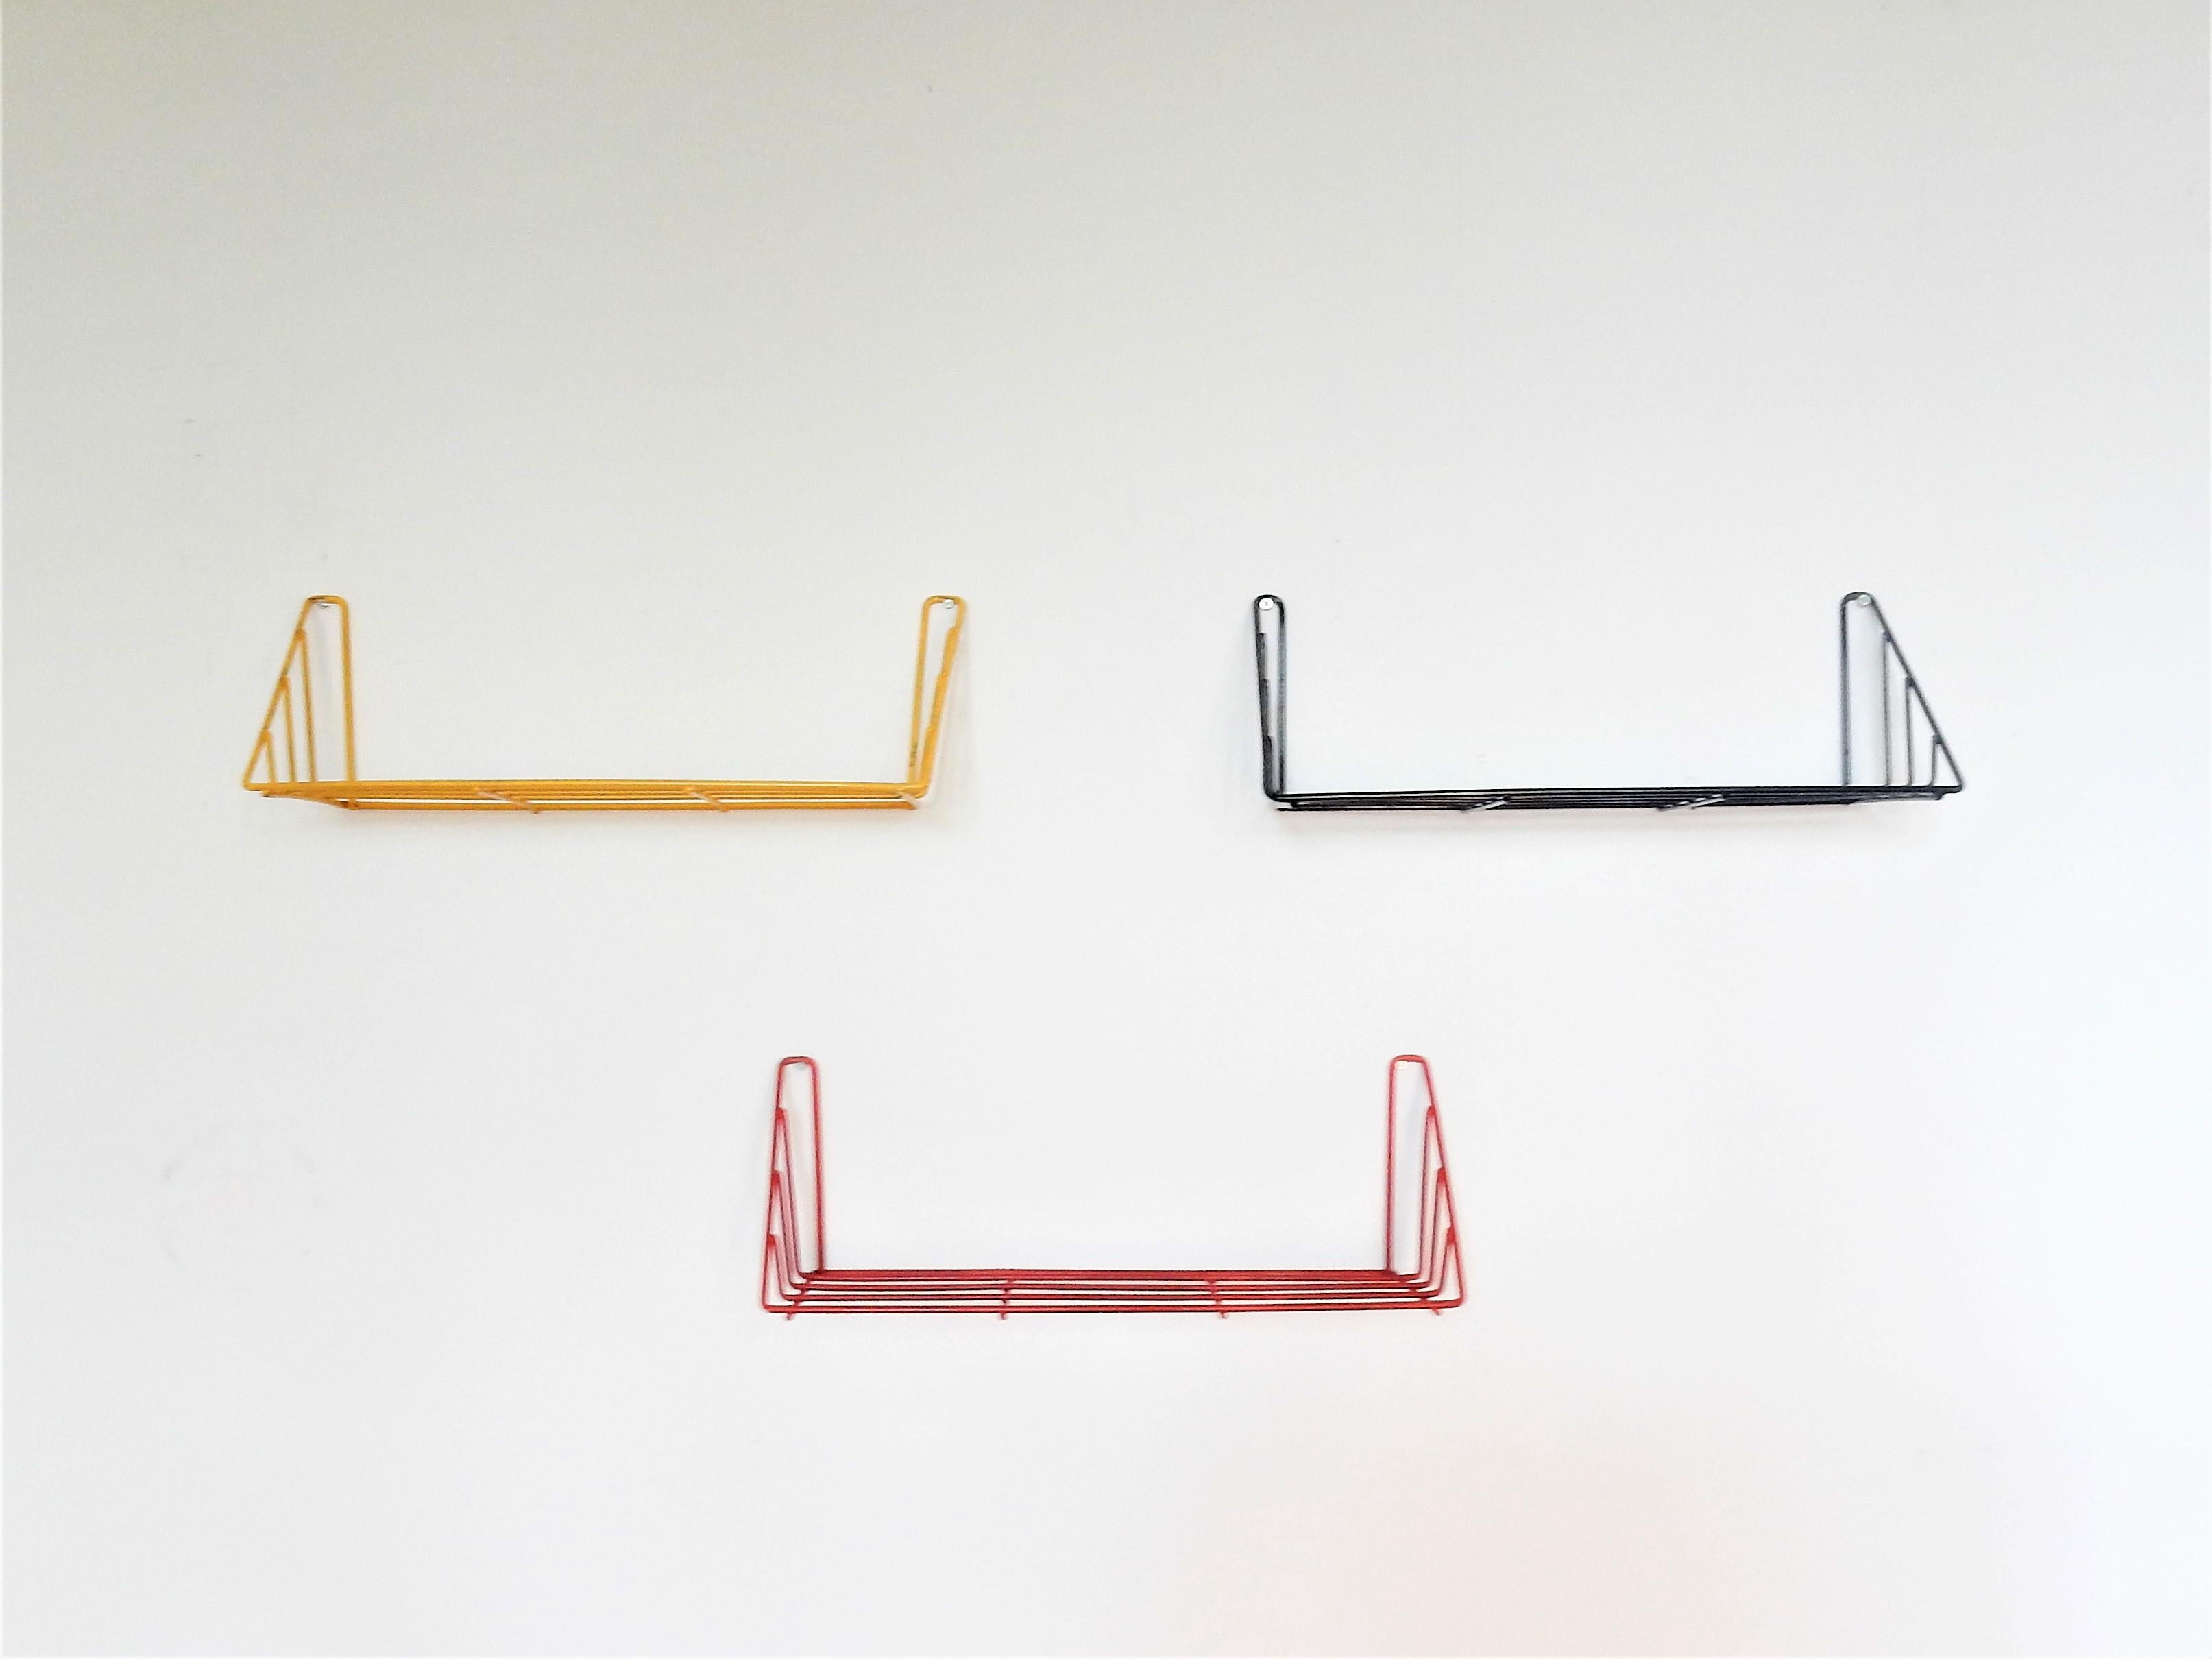 This set of 3 shelves, model 'Delft', was designed by Constant Nieuwenhuys for 't Spectrum in 1957. Nieuwenhuys was a member of the CoBrA movement. He is known as a fine artist, musician, writer and he was also known for his visionary architectural